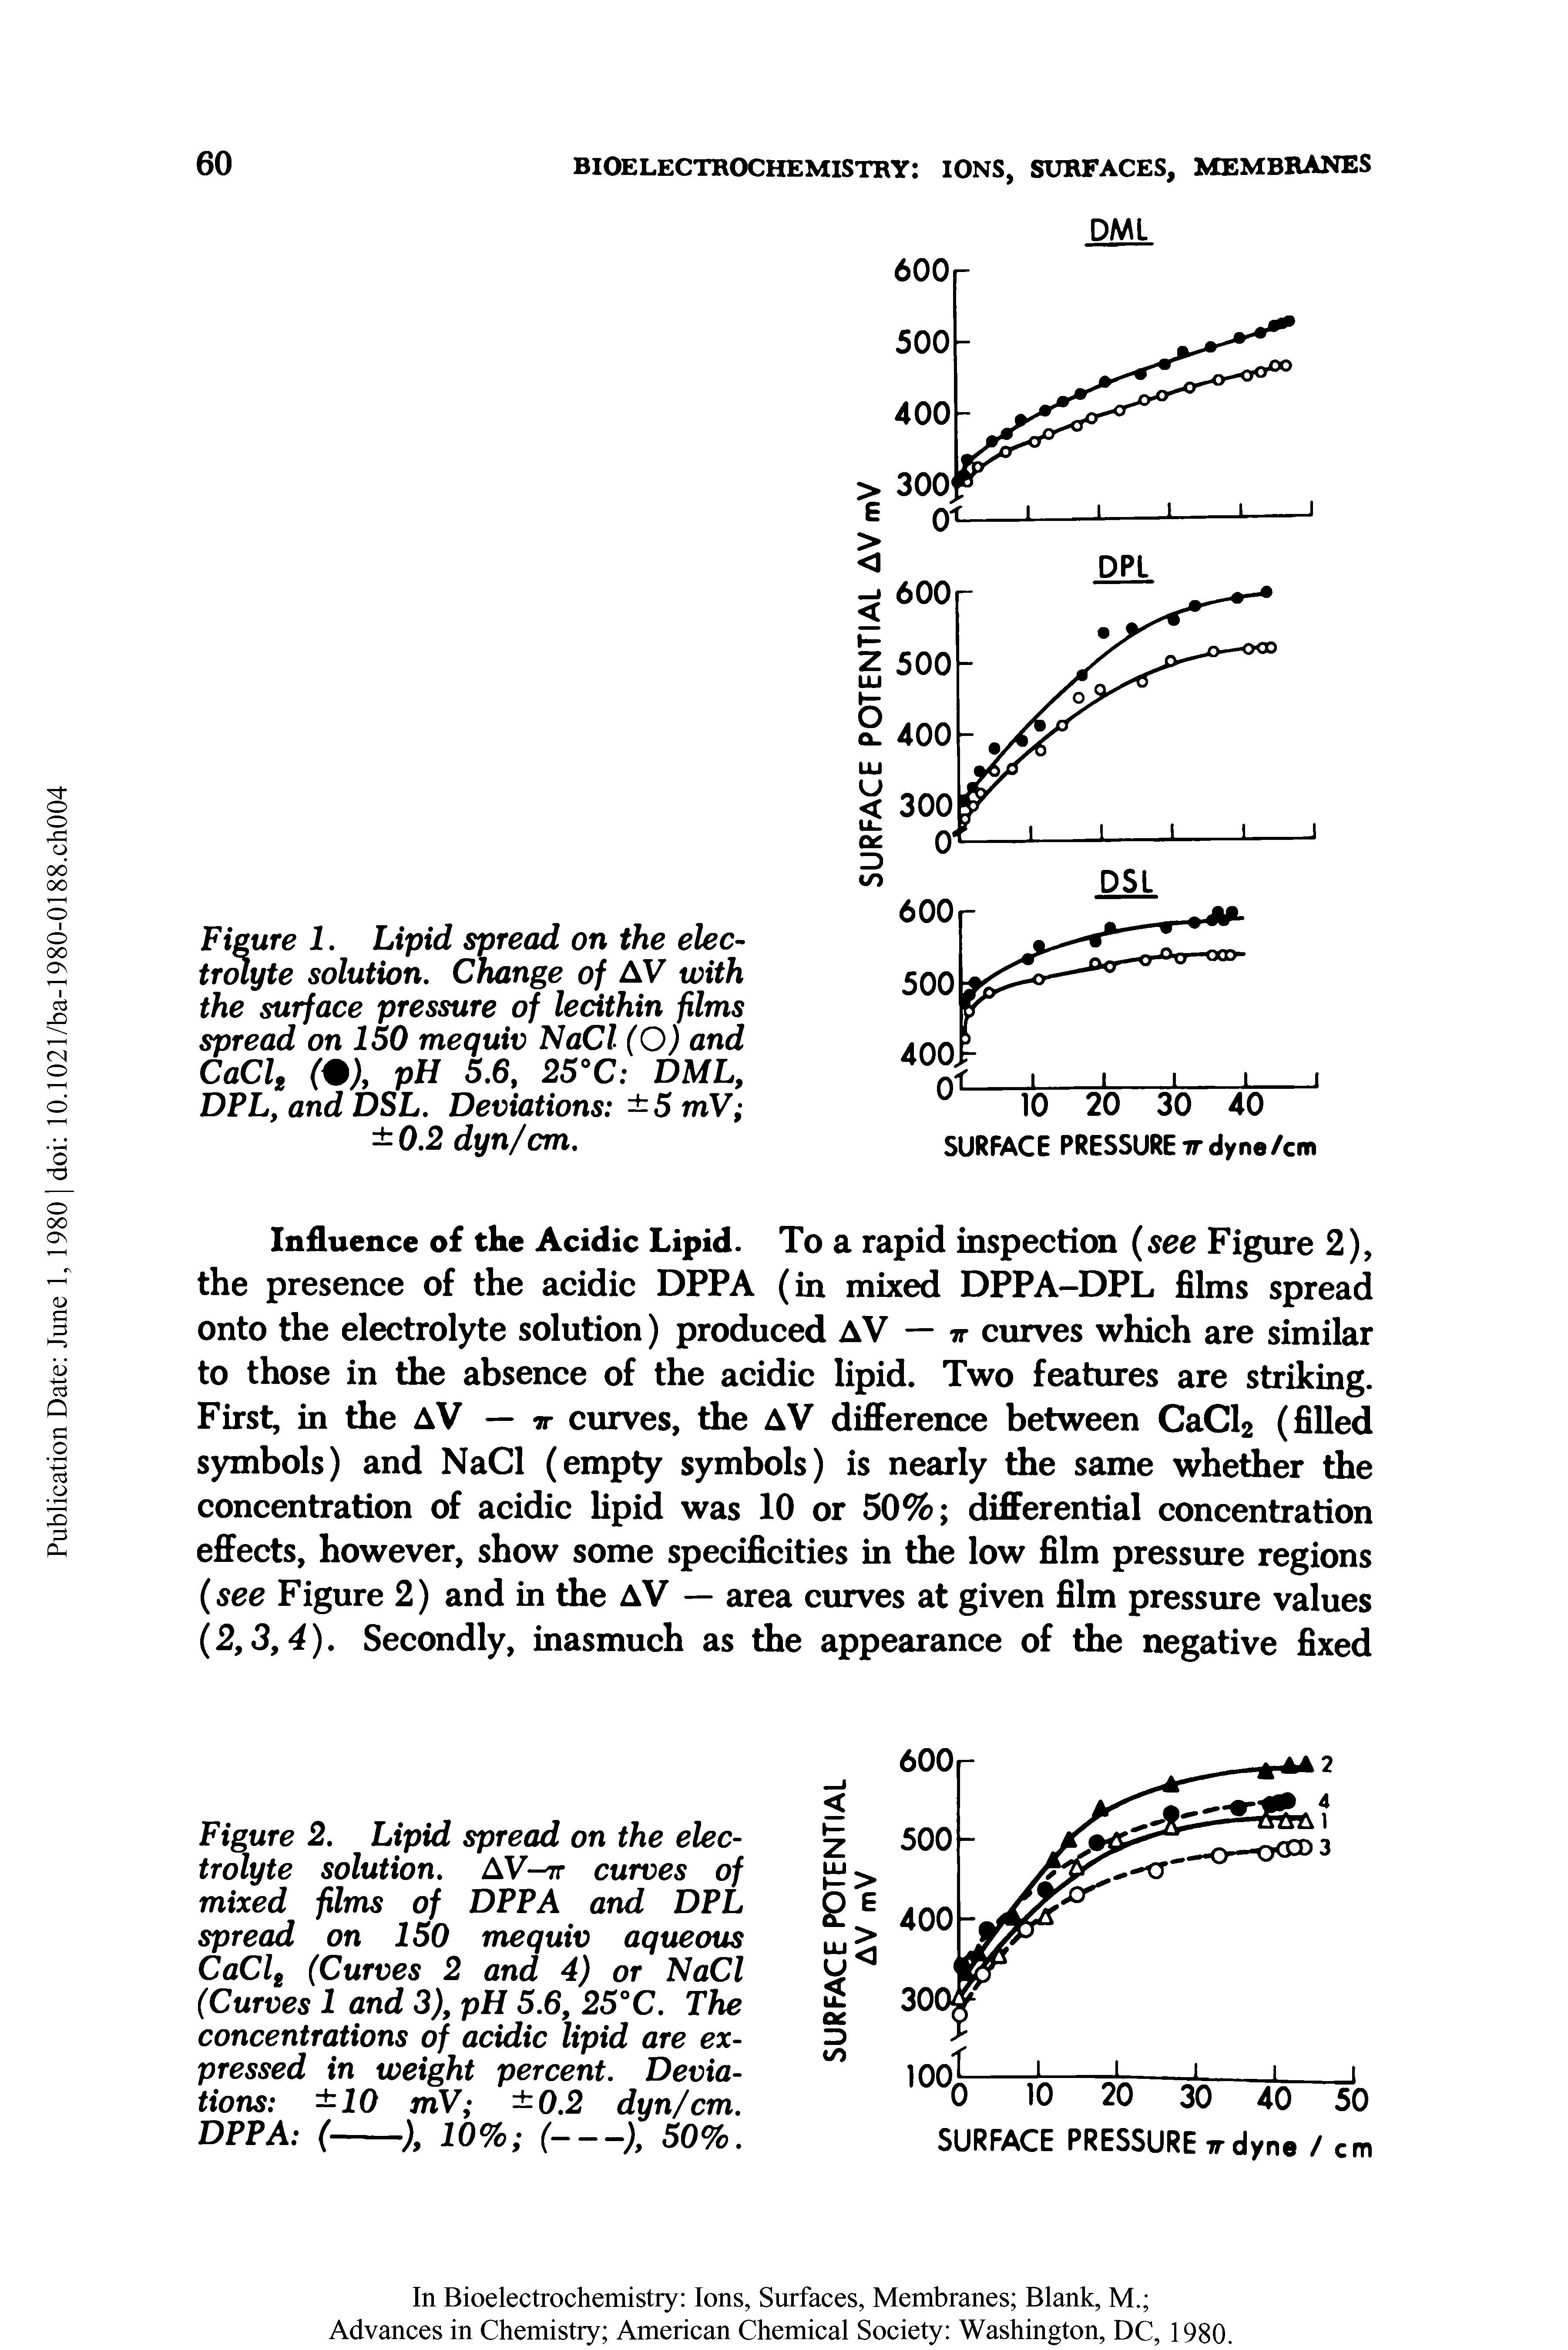 Figure 2. Lipid spread on the electrolyte solution. AV-ir curves of mixed films of DPPA and DPL spread on 150 mequiv aqueous CaCl2 (Curves 2 and 4) or NaCl (Curves 1 and 3), pH 5.6, 25°C. The concentrations of acidic lipid are expressed in weight percent. Deviations 10 mV 0.2 dyn/cm. DPPA (-------), 10% (------), 50%.